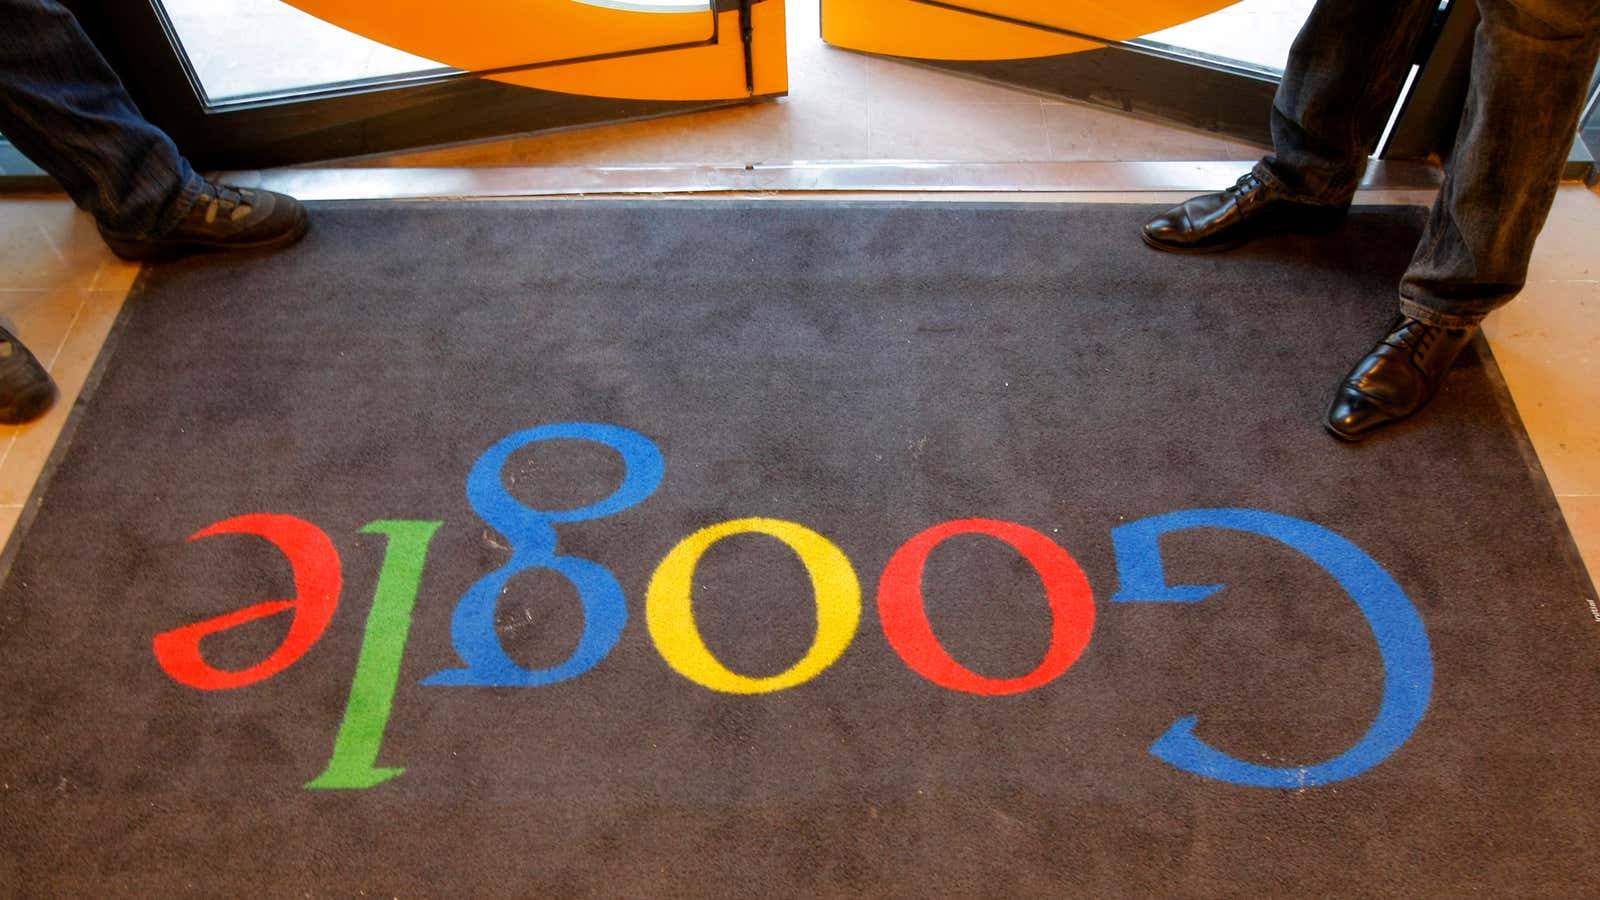 Google can track your every footprint.